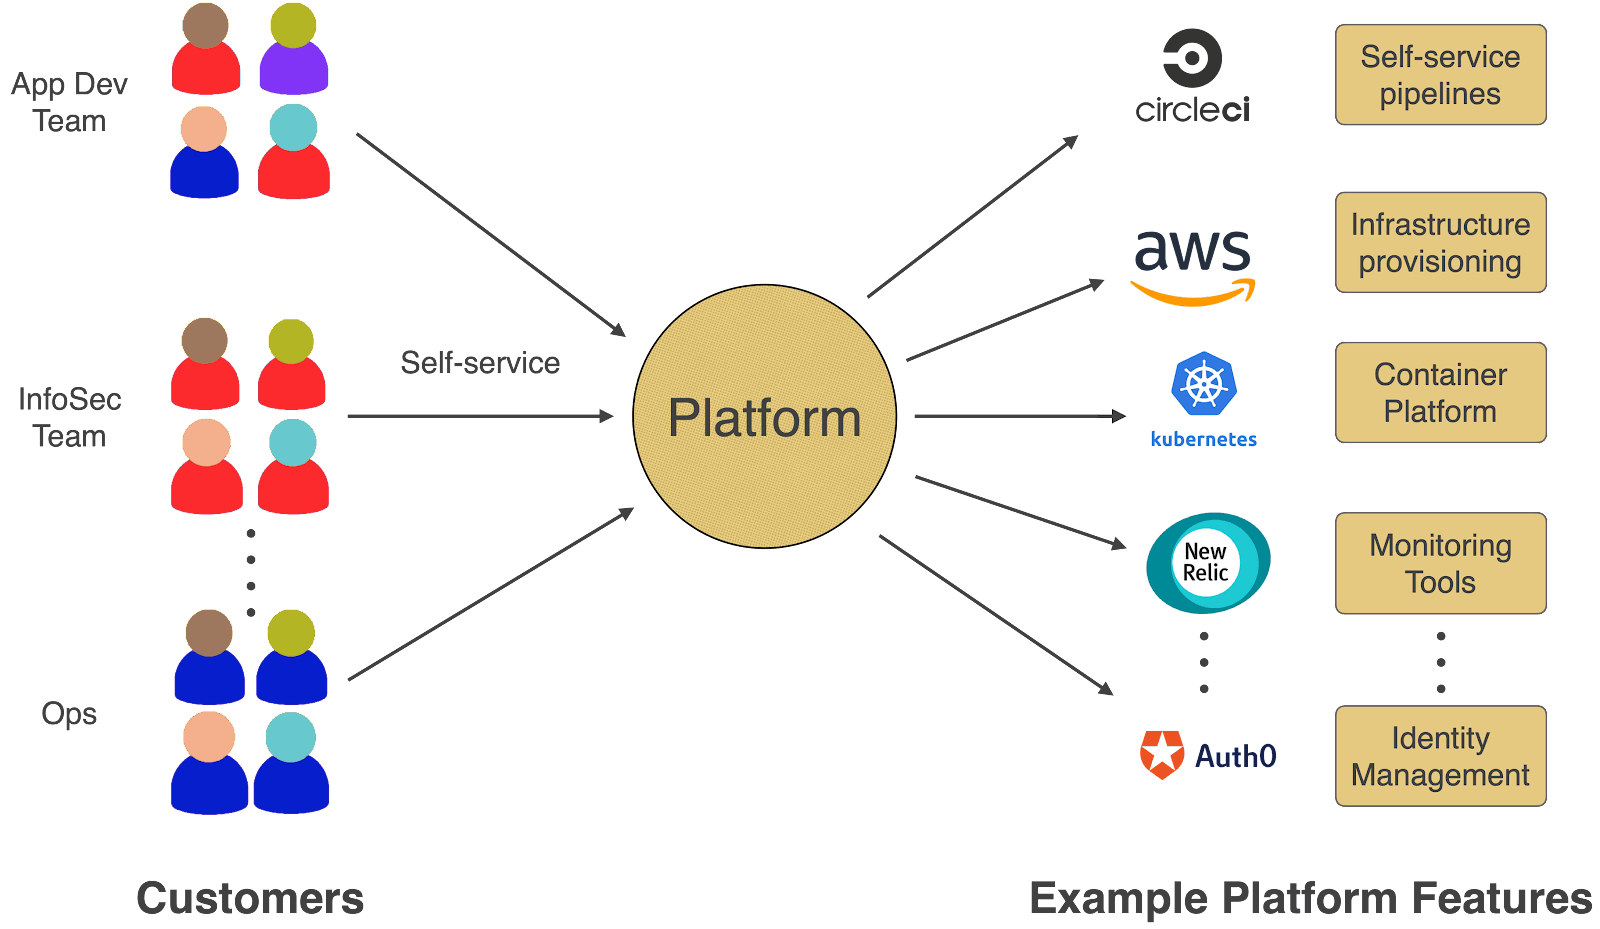 IDP Integration with different tools and platforms | Source: https://www.cloudknit.io/blog/platform-engineering